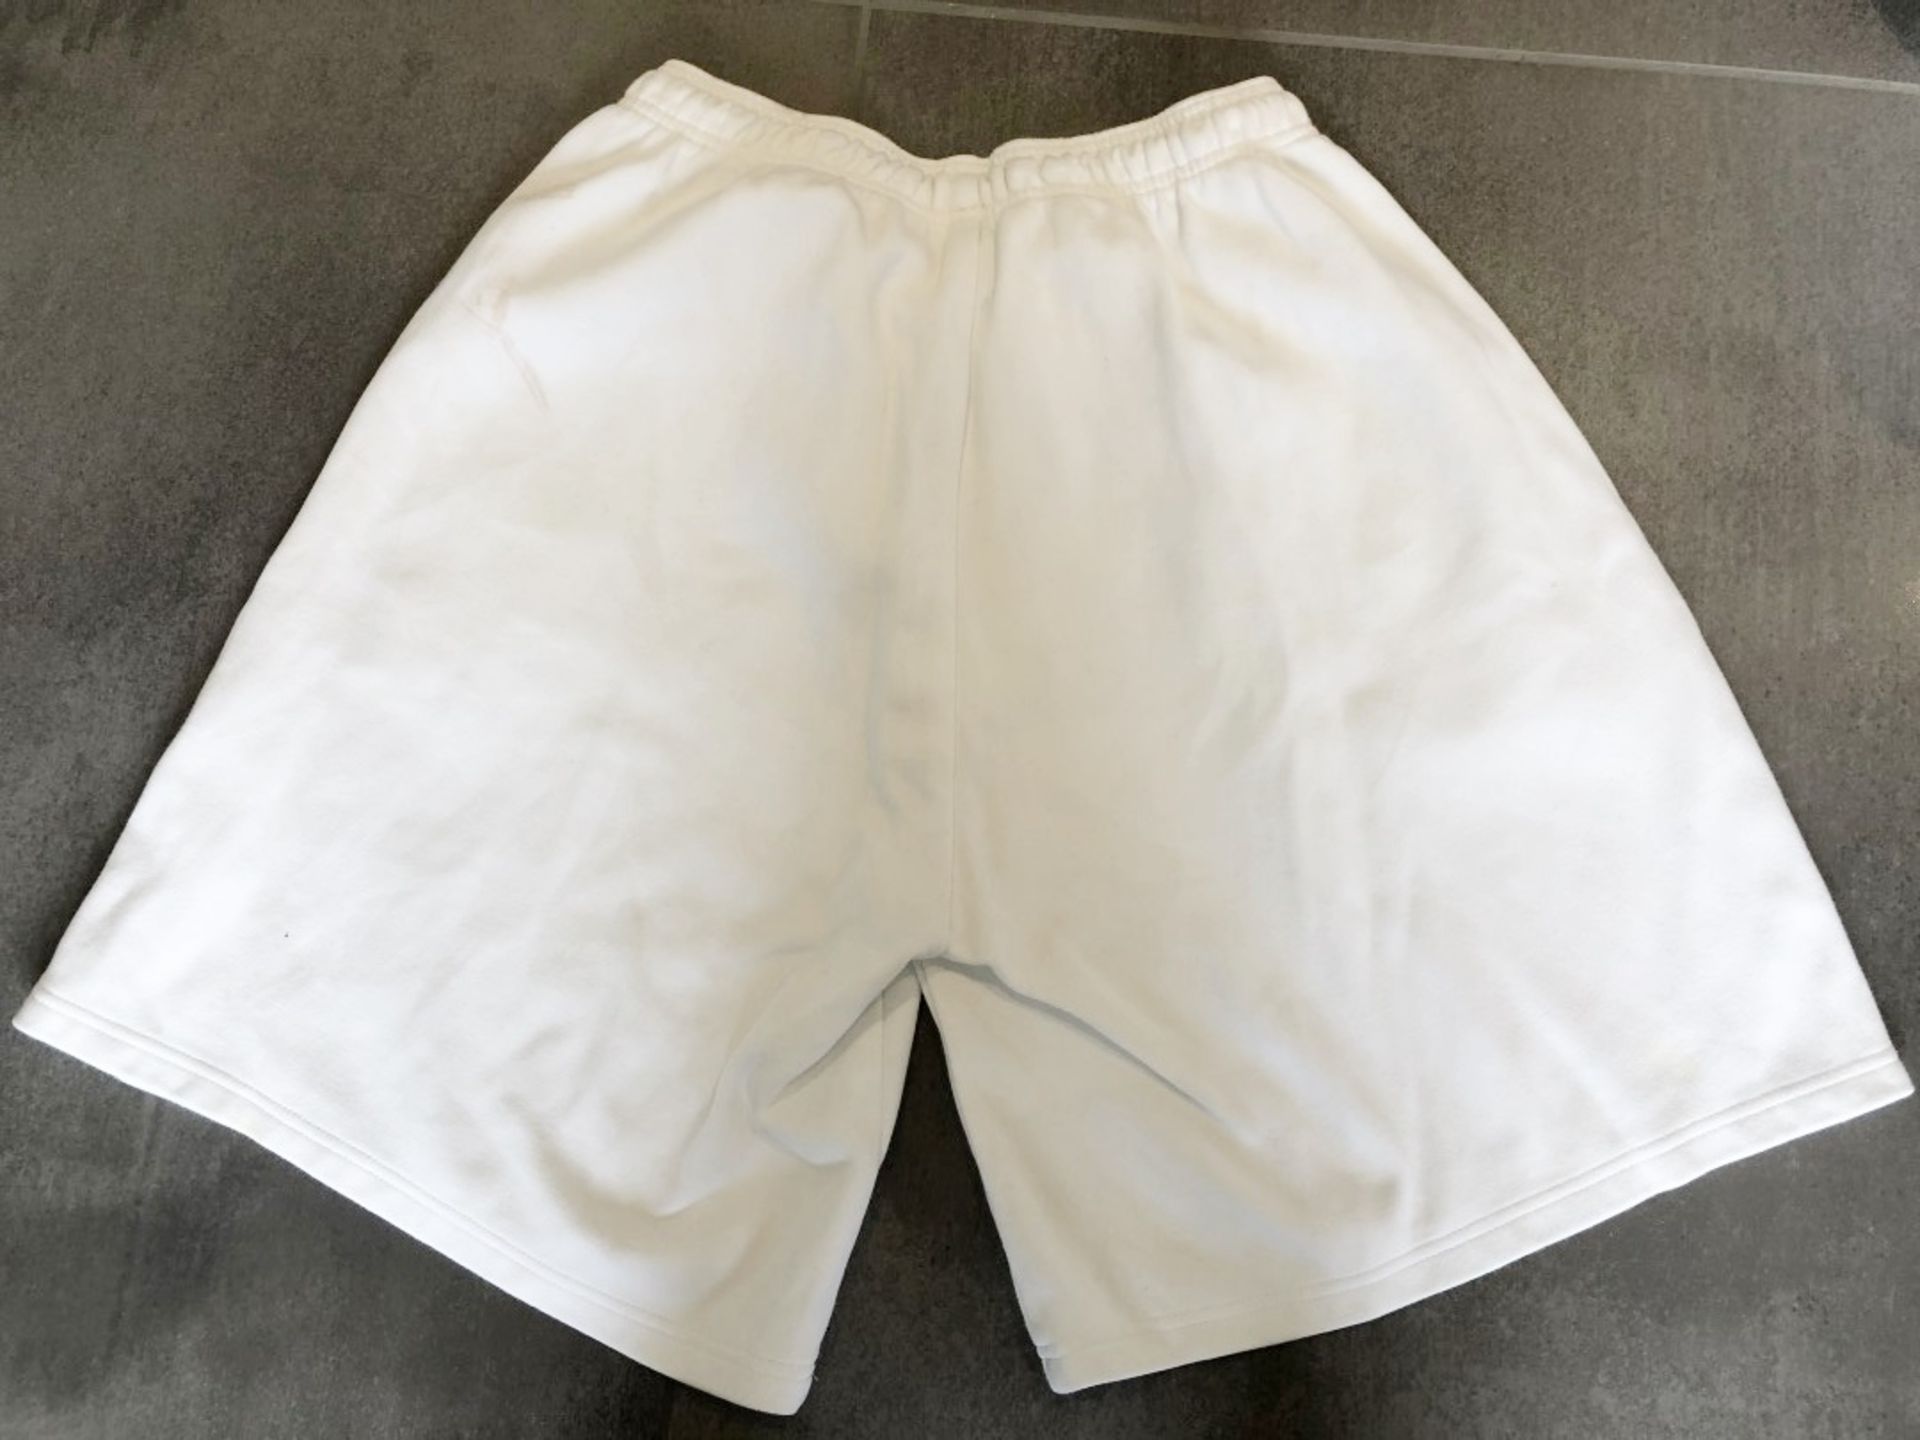 1 x Pair Of Men's Genuine Adidas Shorts In White - Size (EU/UK): L/L - Preowned - Ref: JS126 - NO - Image 3 of 9